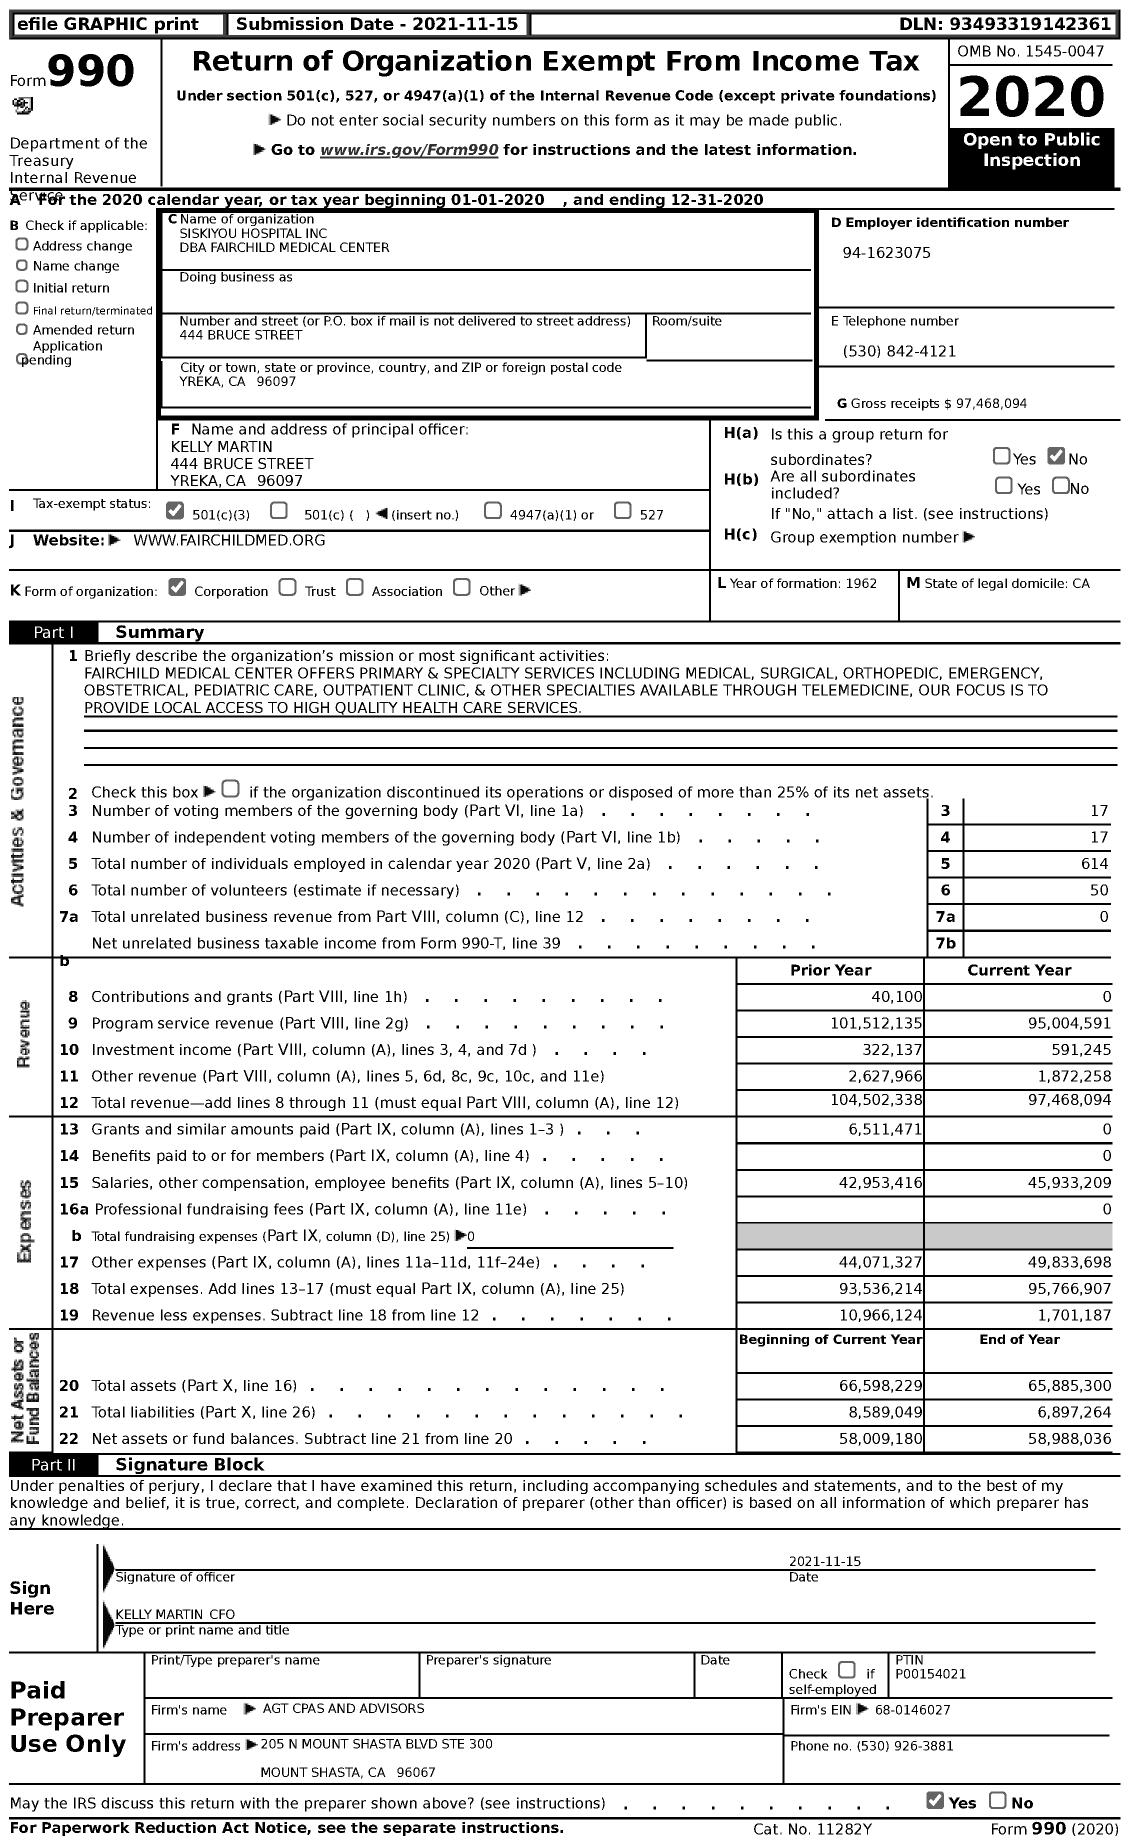 Image of first page of 2020 Form 990 for Fairchild Medical Center (FMC)